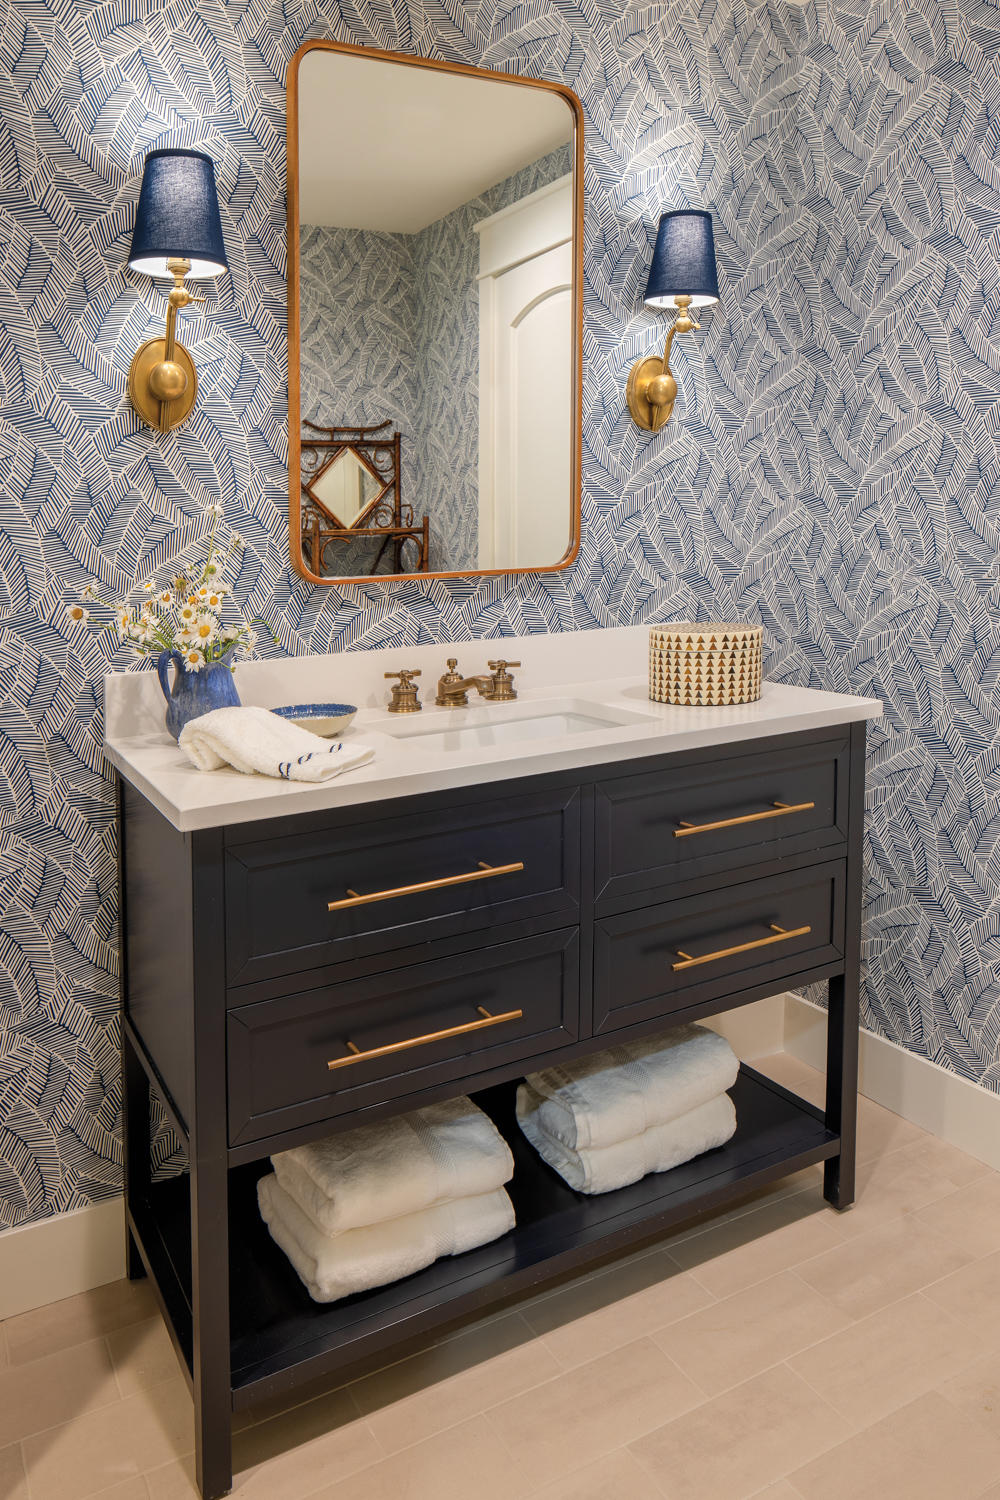 A powder room with blue...